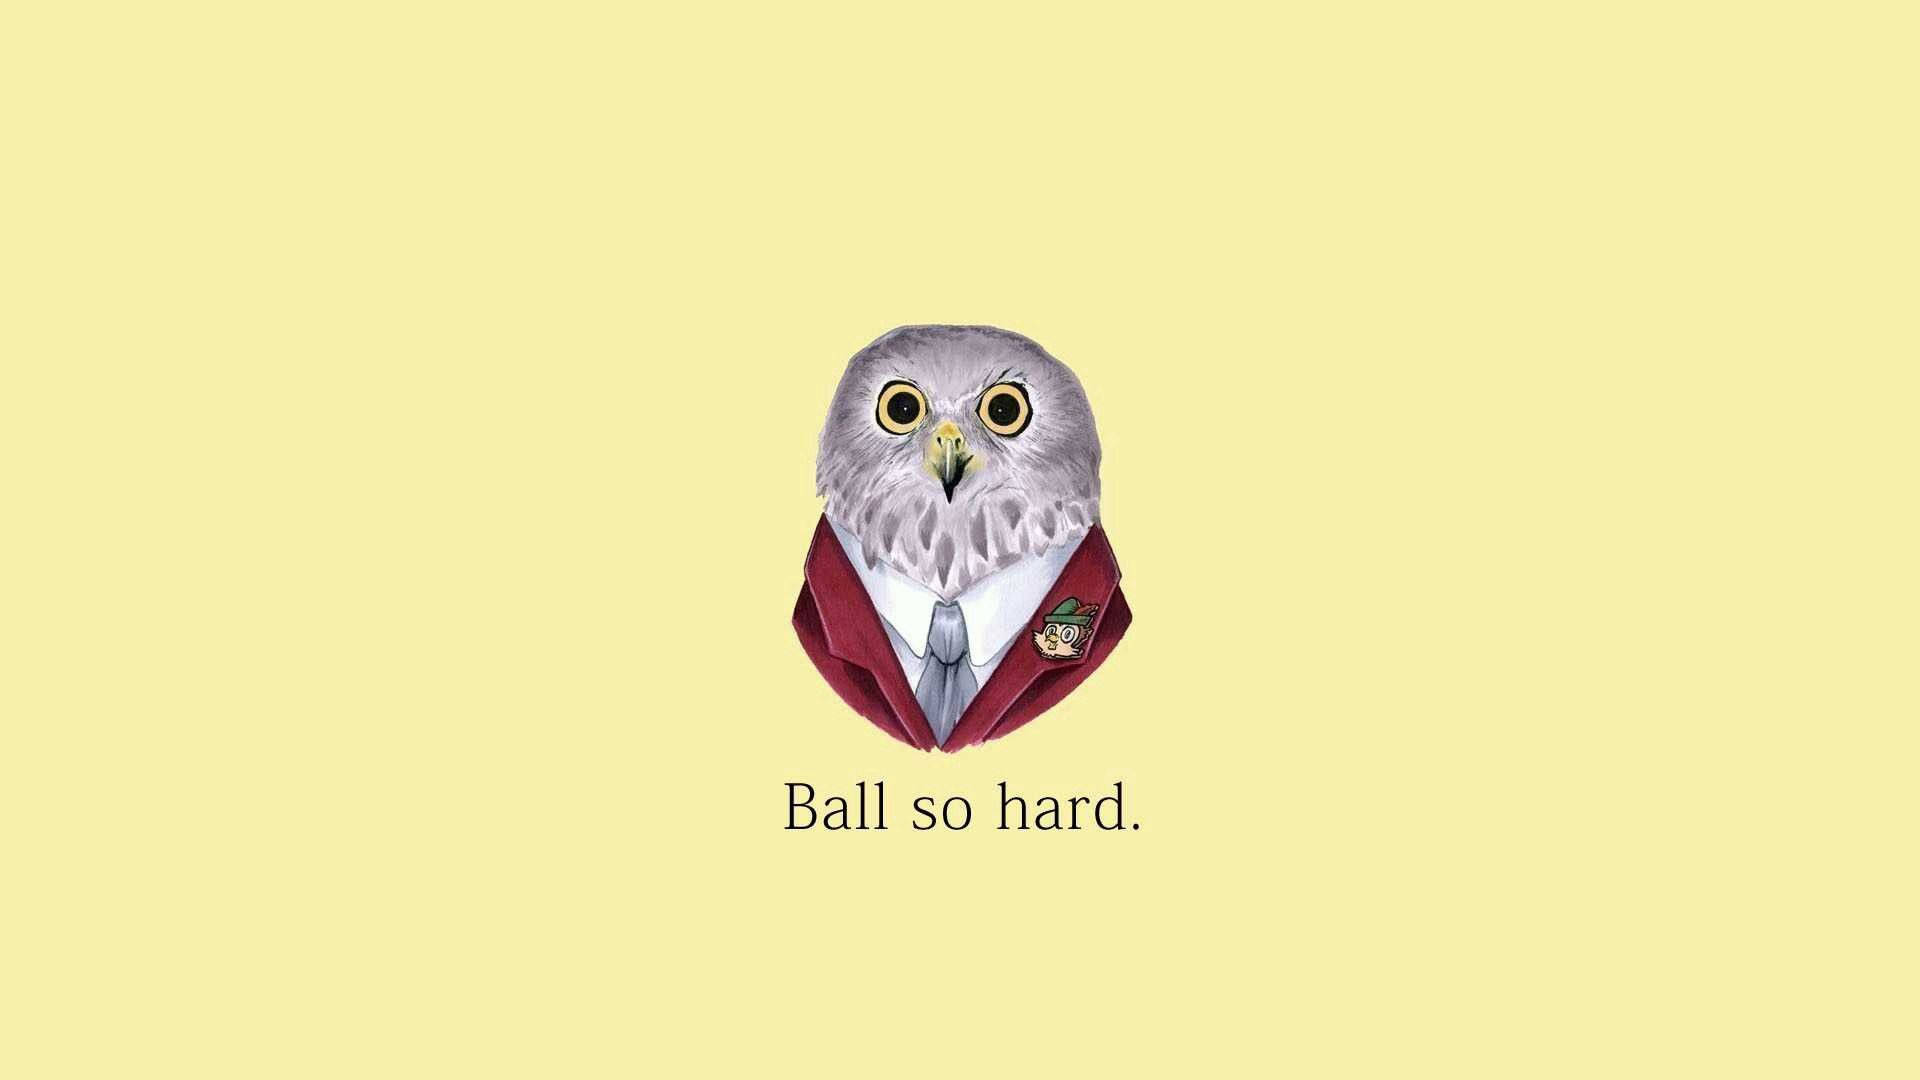 An owl determined to stay atop the ball, no matter what. Wallpaper